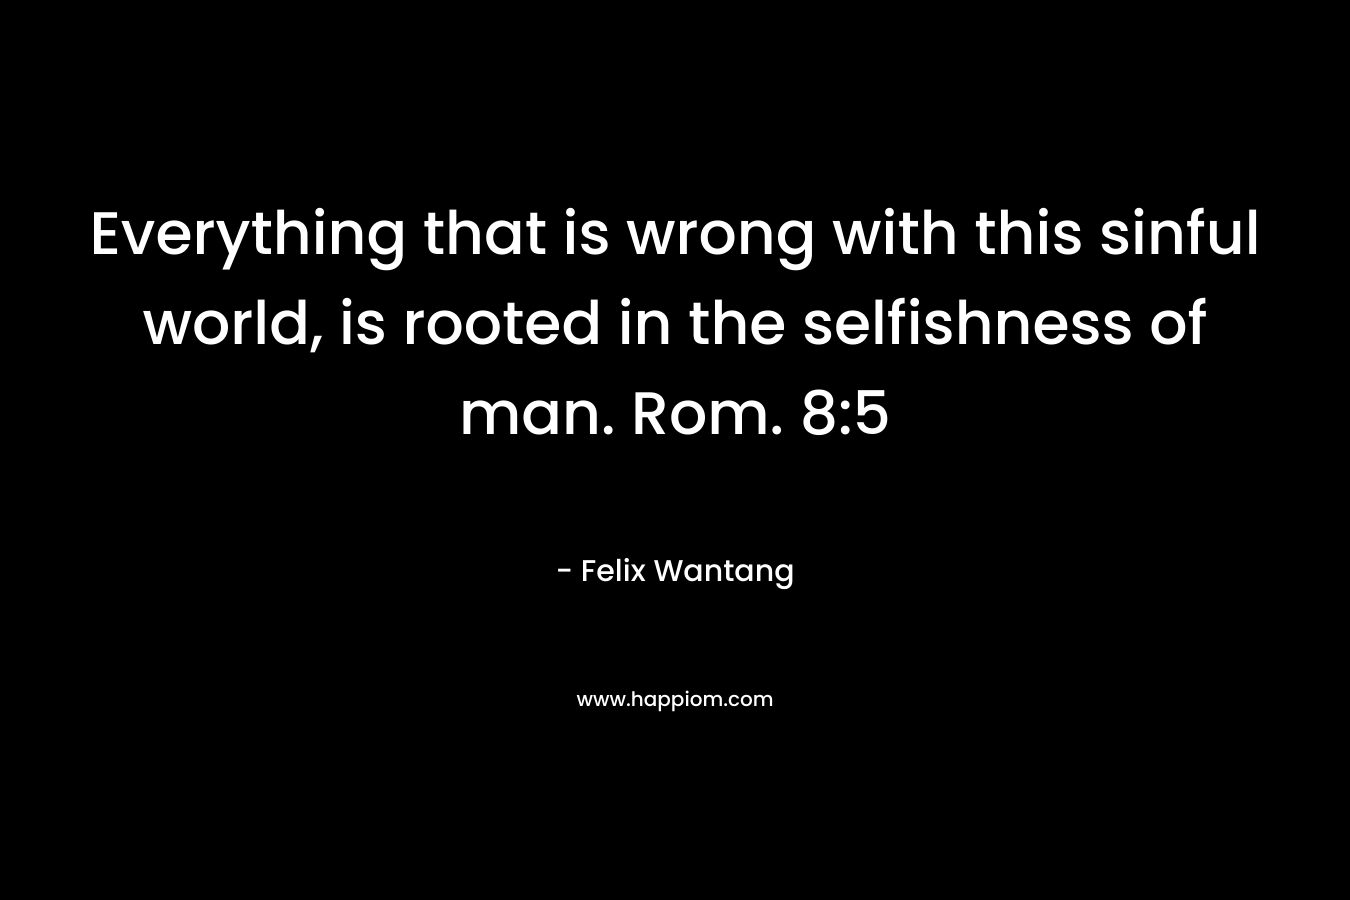 Everything that is wrong with this sinful world, is rooted in the selfishness of man. Rom. 8:5